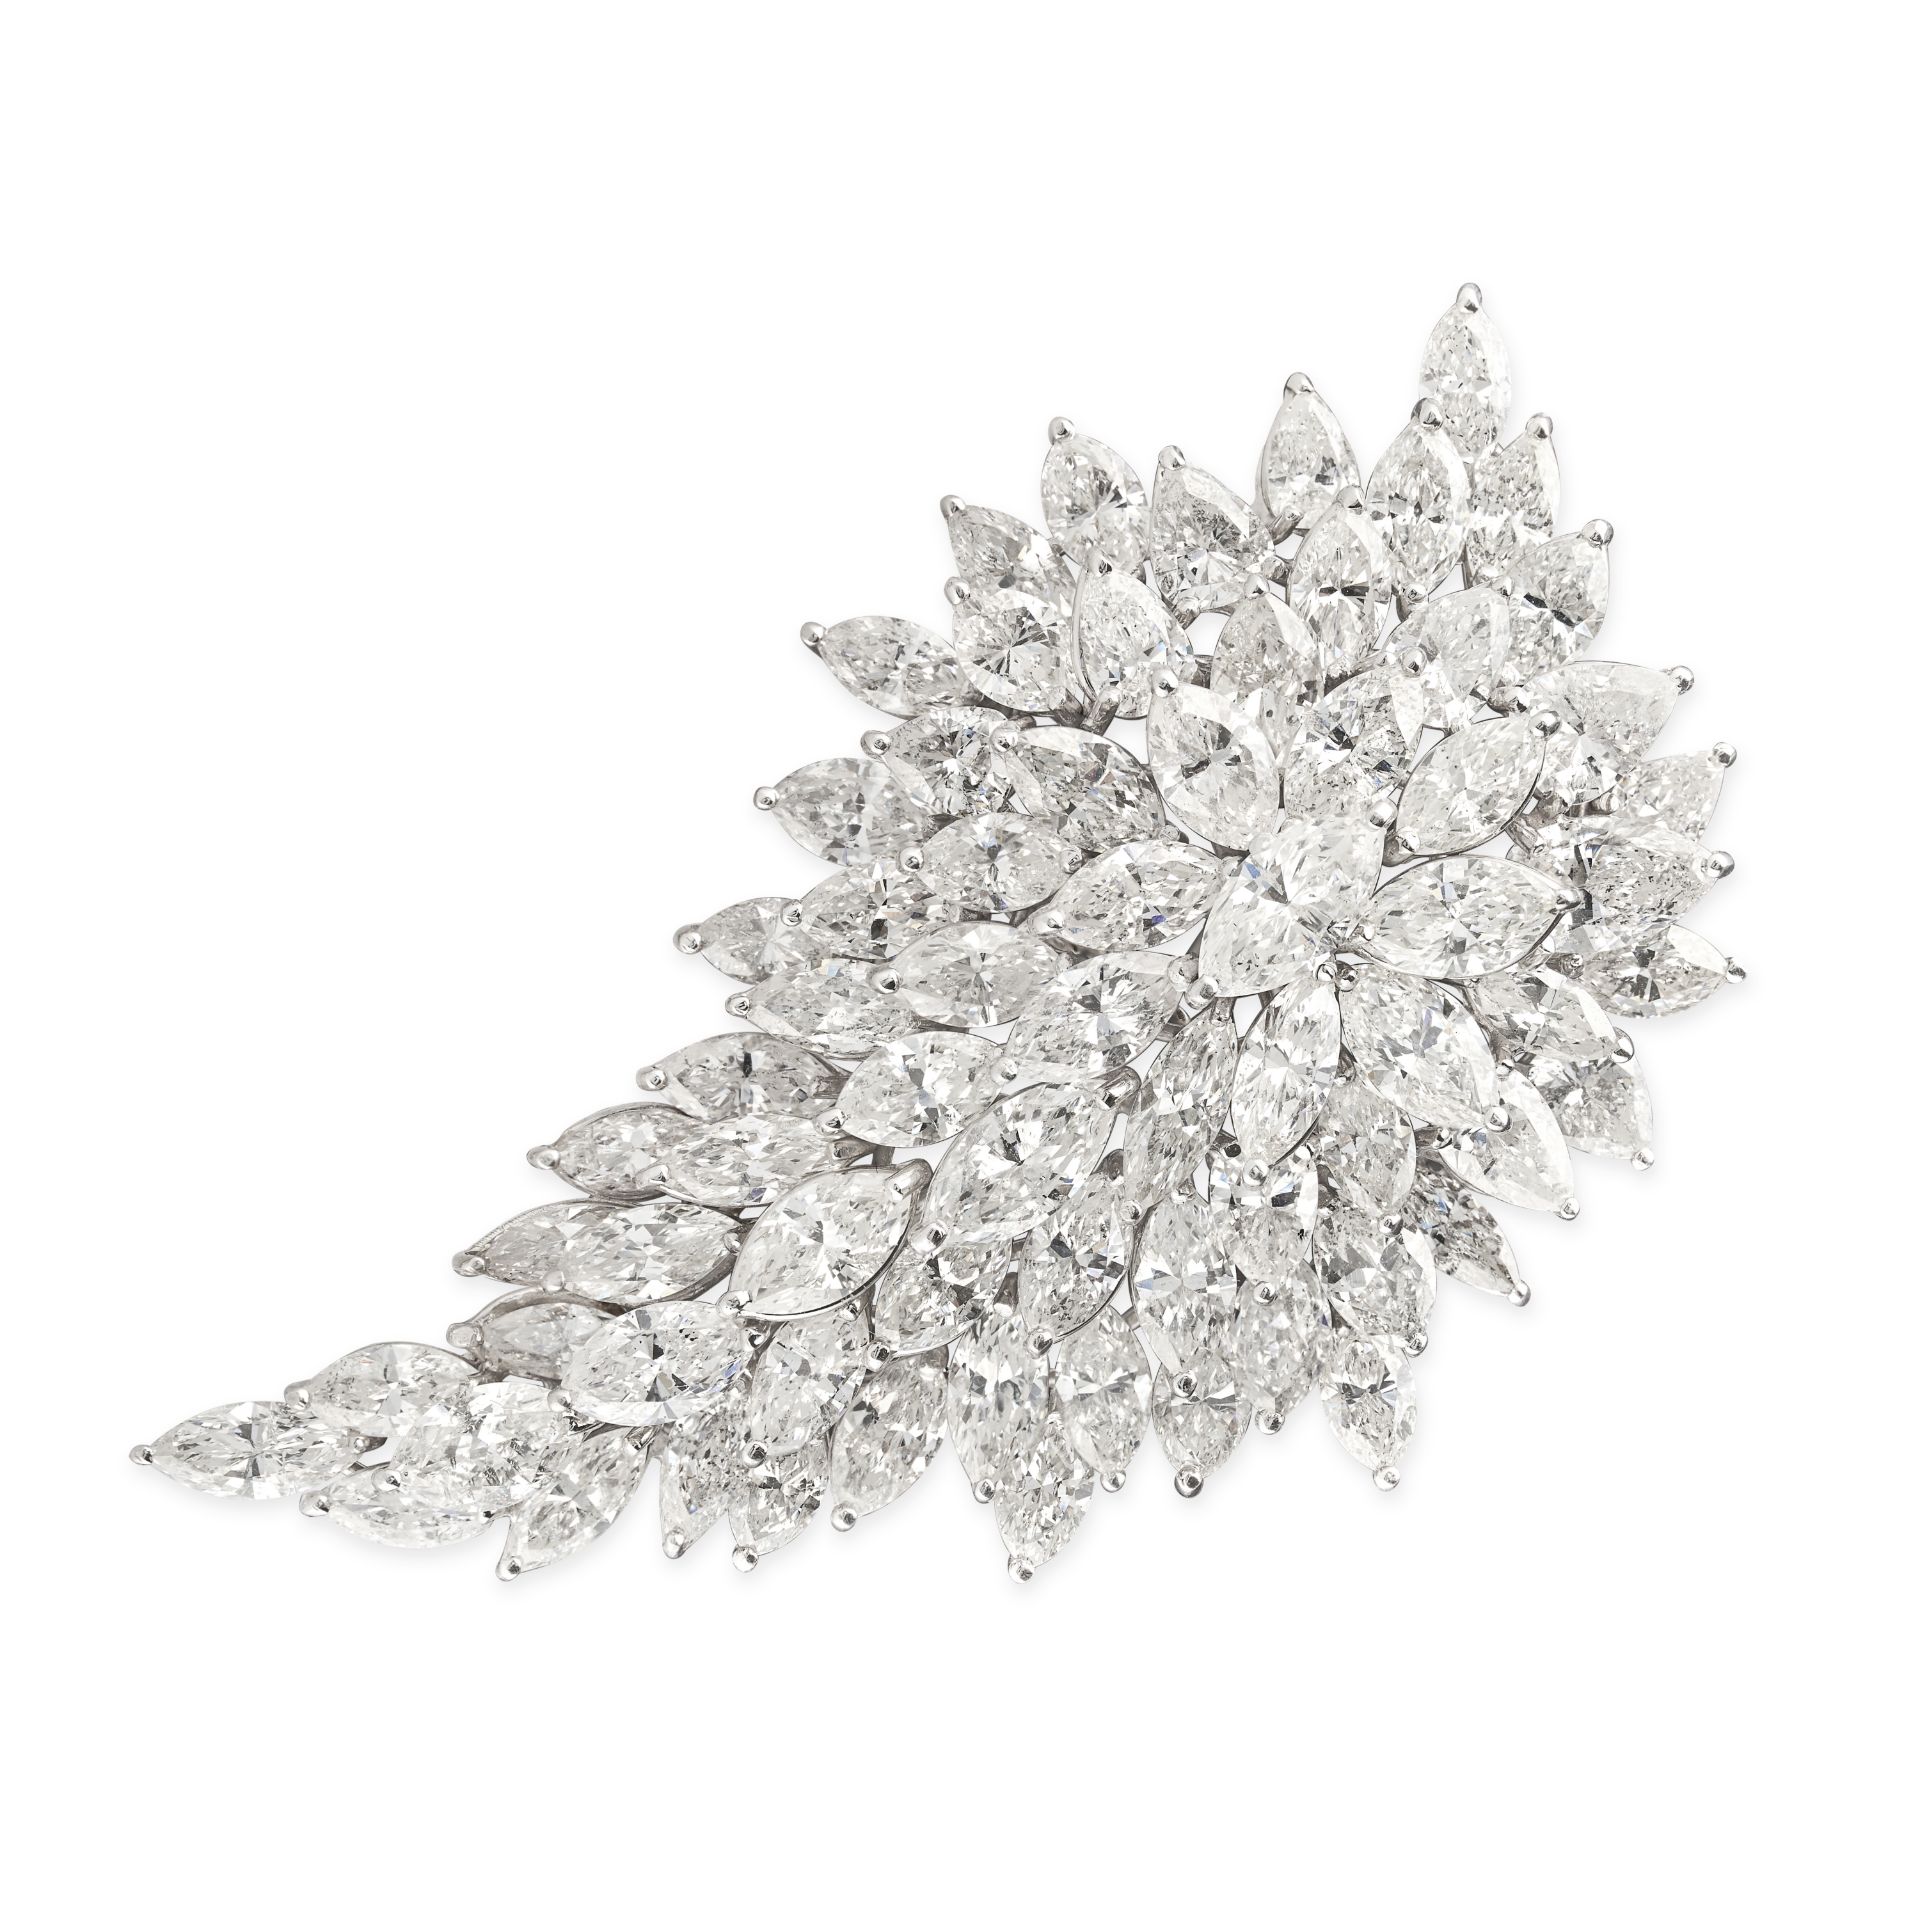 A FINE DIAMOND SPRAY BROOCH in platinum, set with a cluster of pear and marquise brilliant cut di...